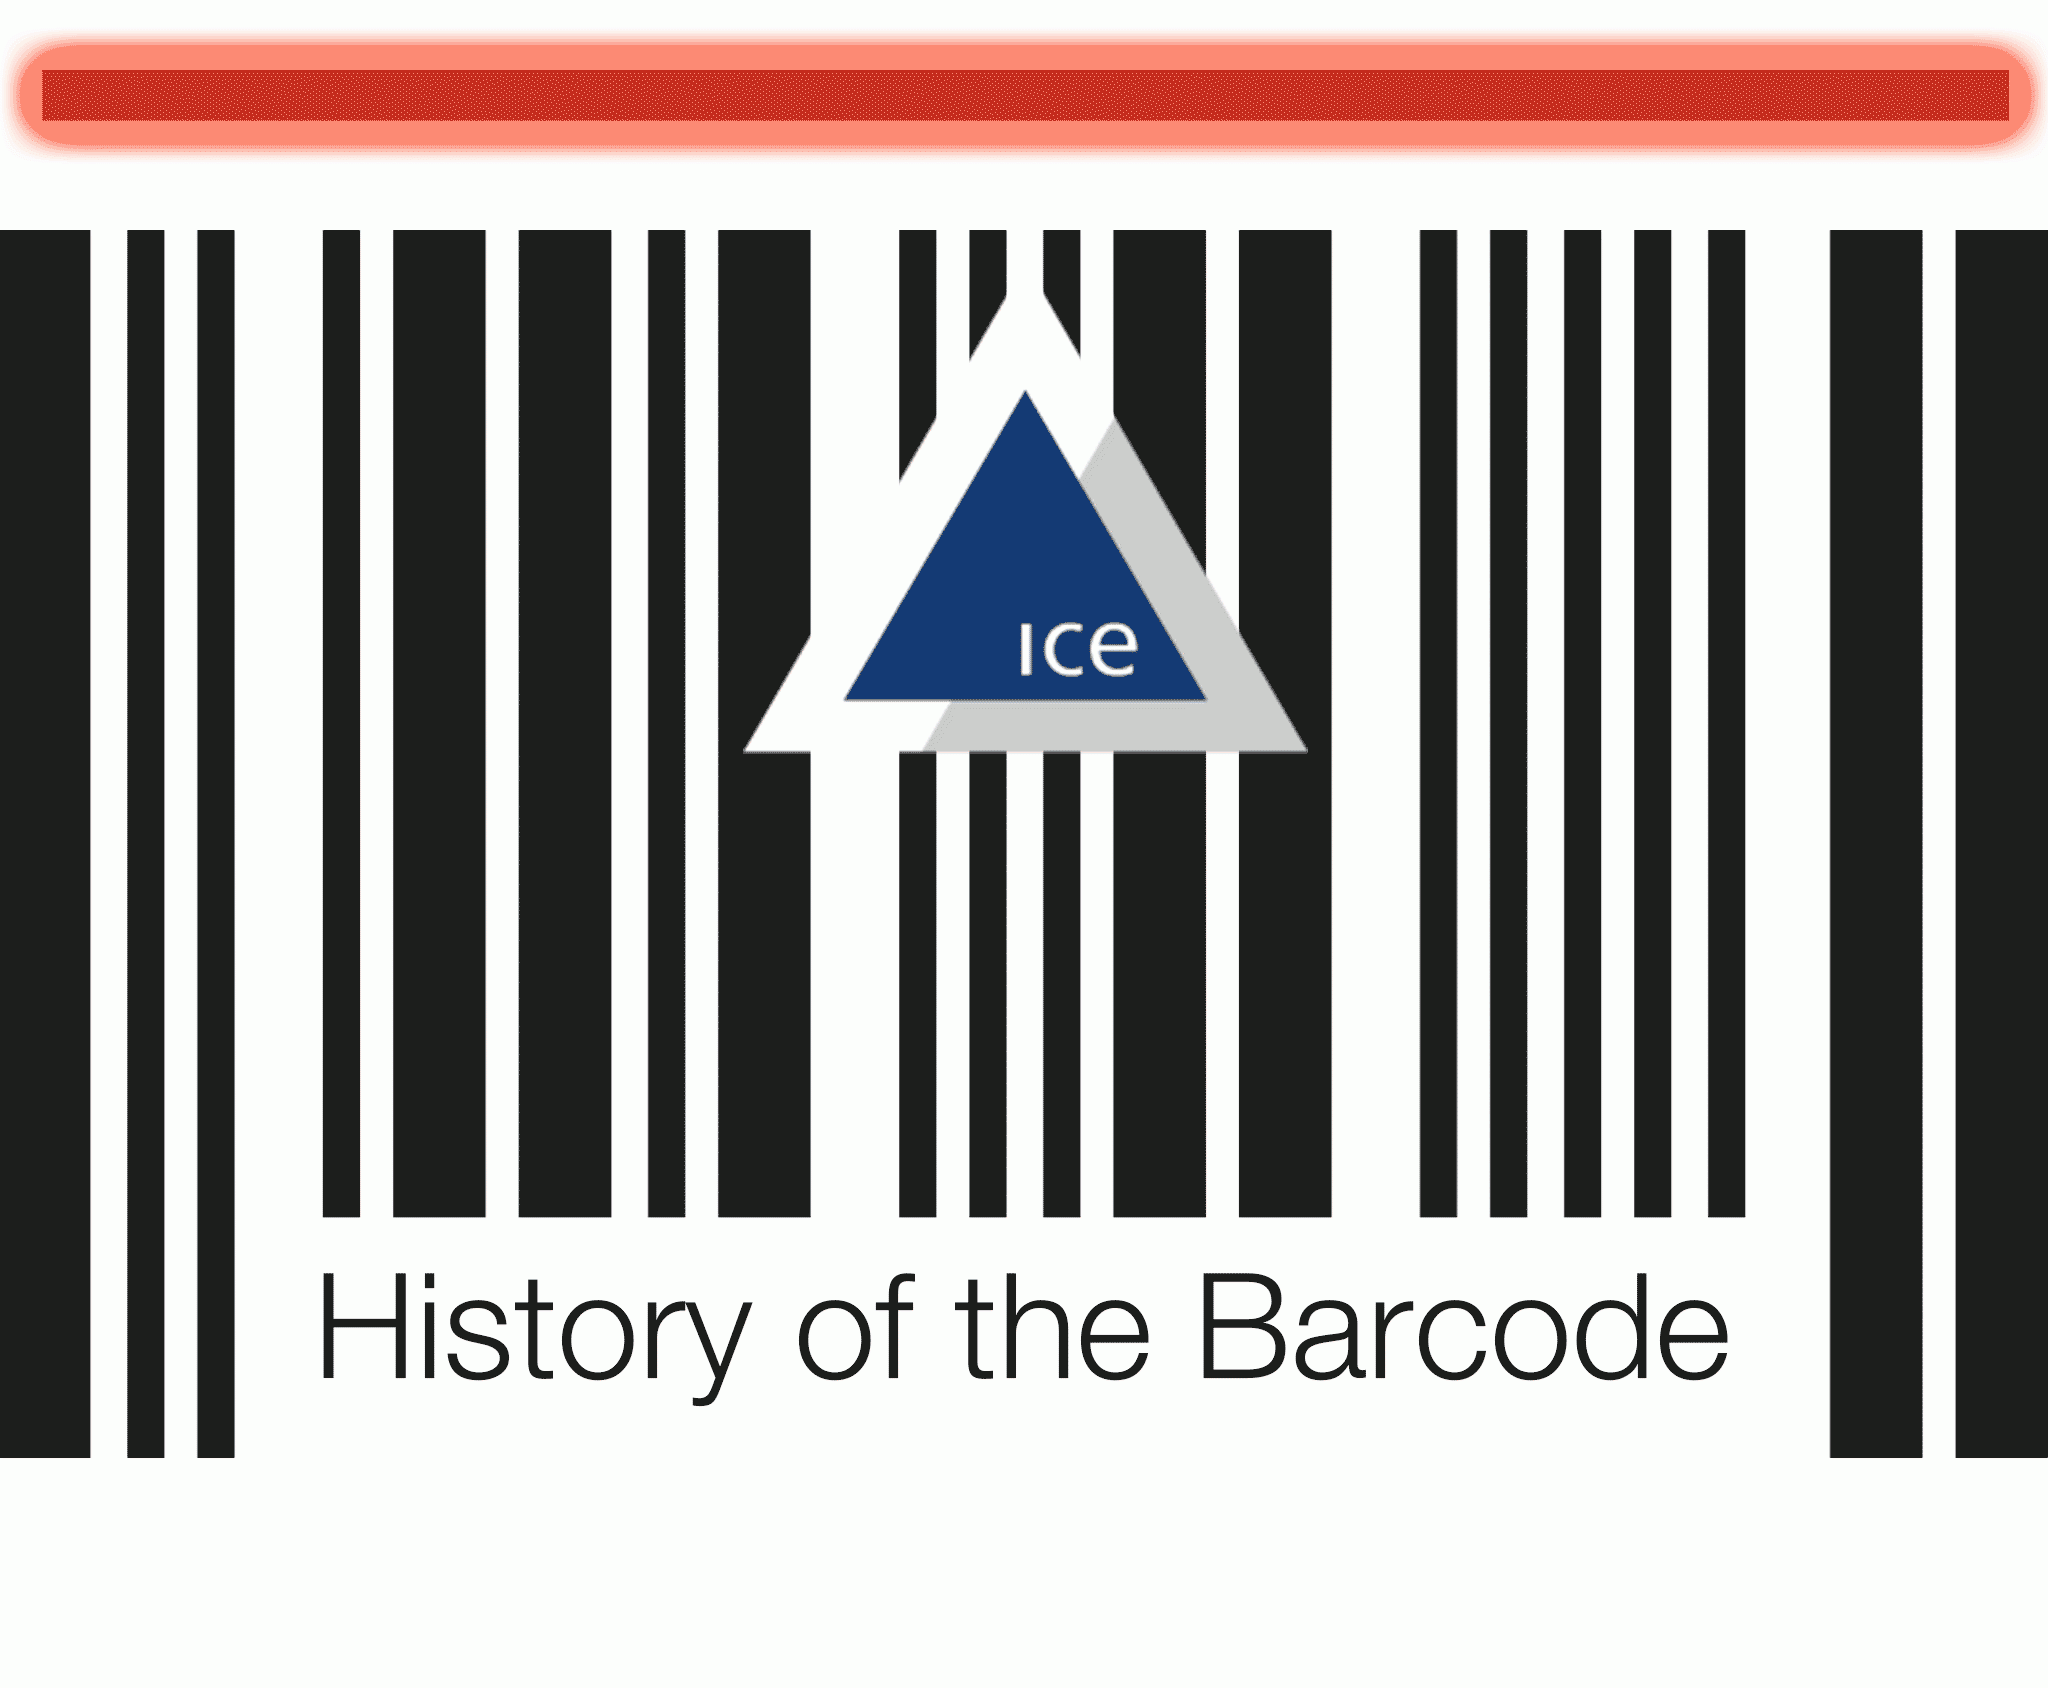 History of the Barcode 09 08 2